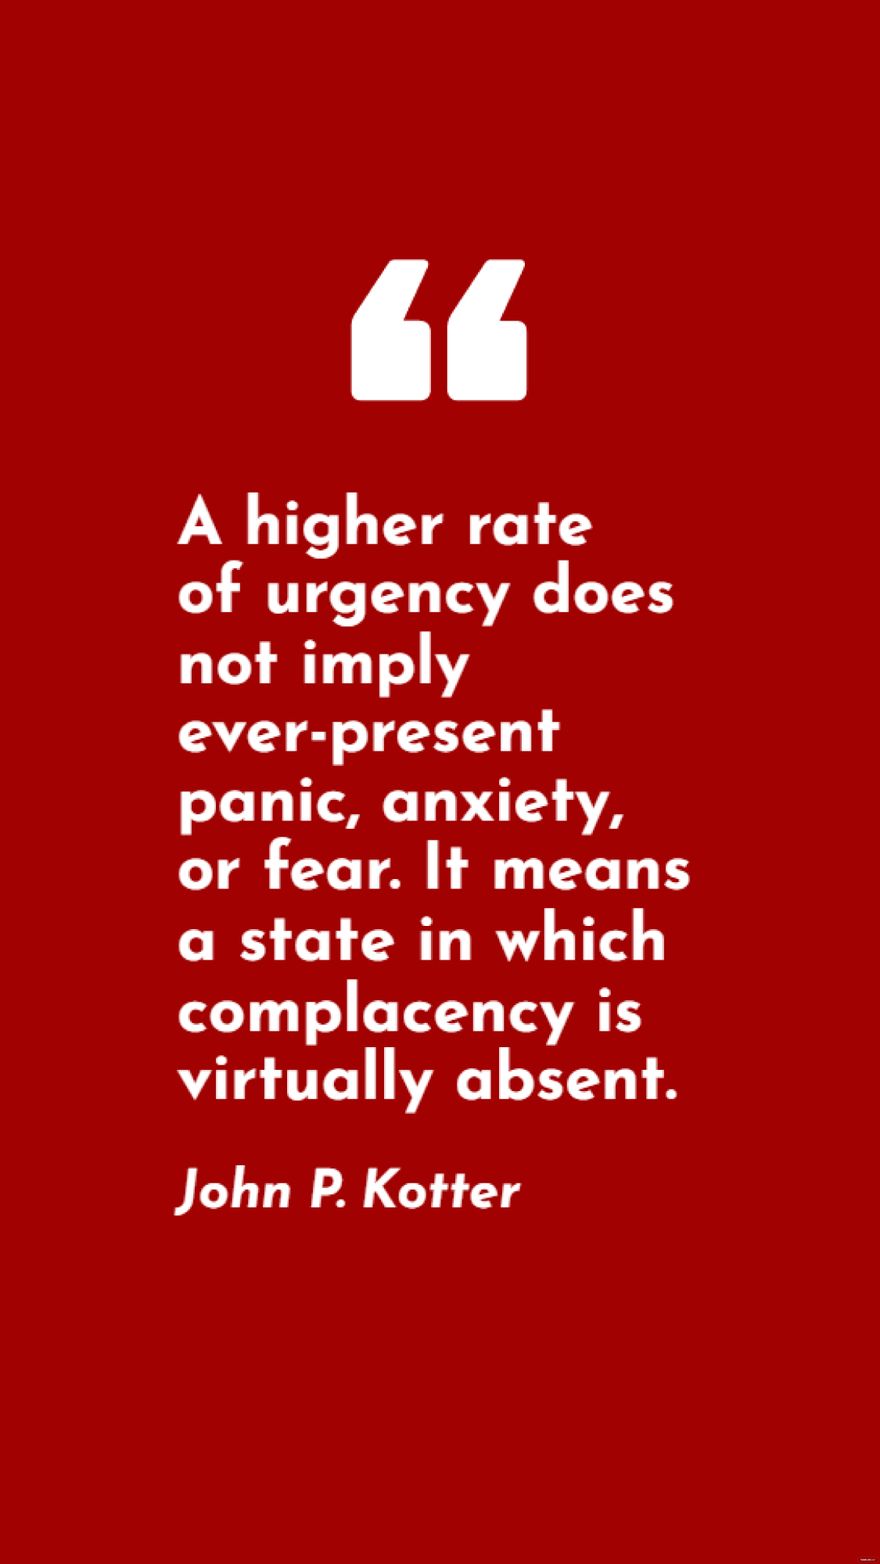 John P. Kotter - A higher rate of urgency does not imply ever-present panic, anxiety, or fear. It means a state in which complacency is virtually absent. in JPG